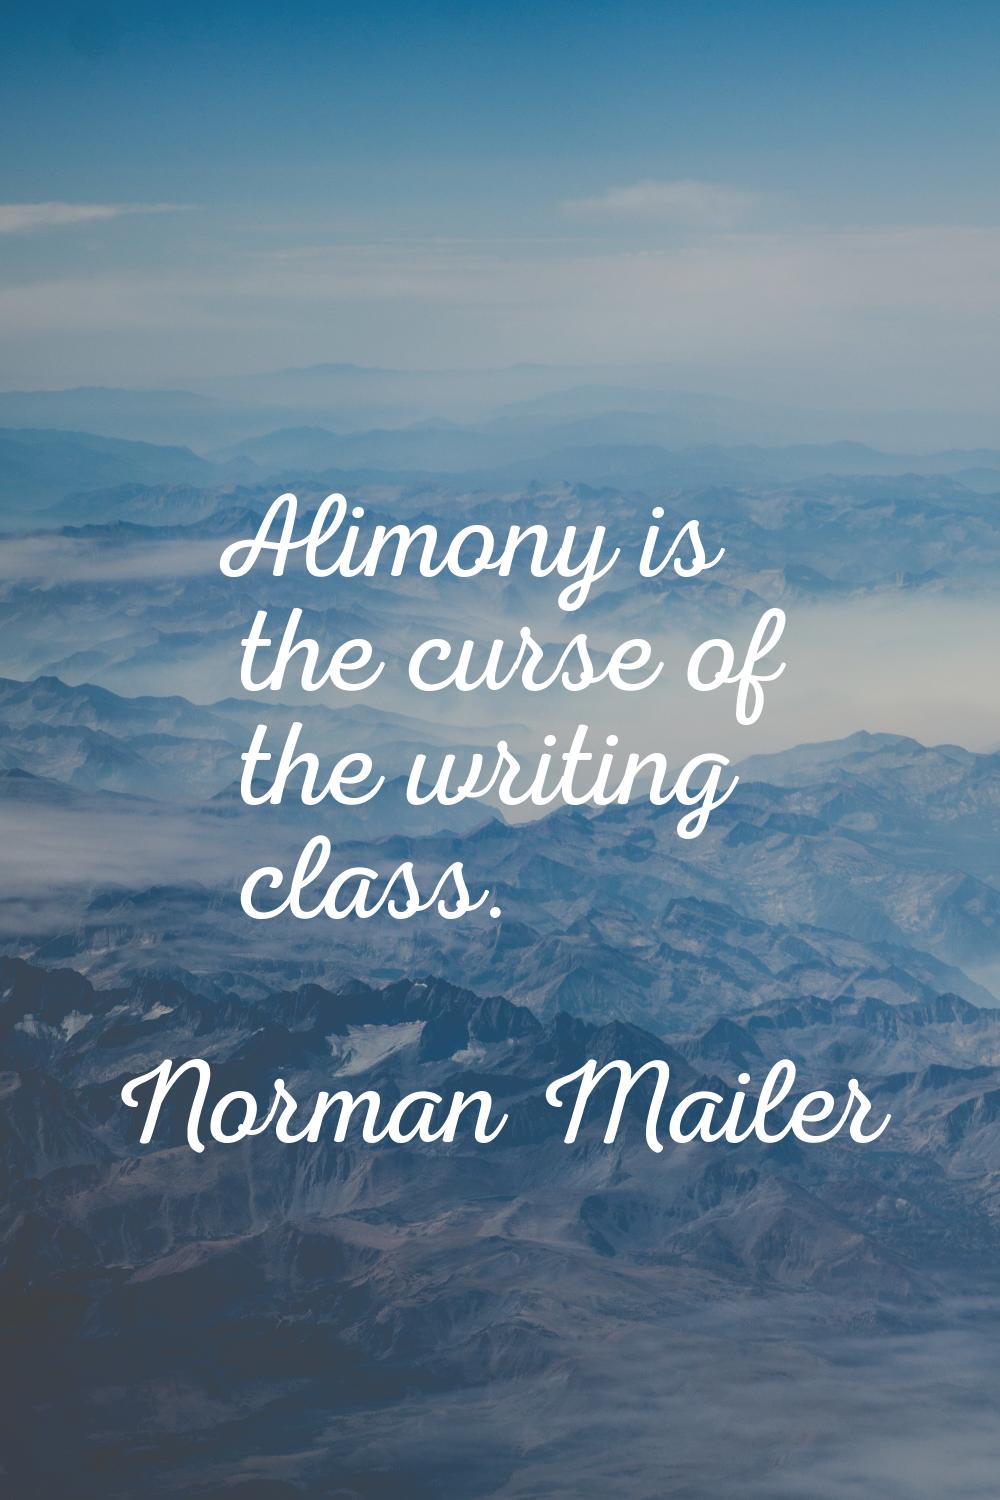 Alimony is the curse of the writing class.